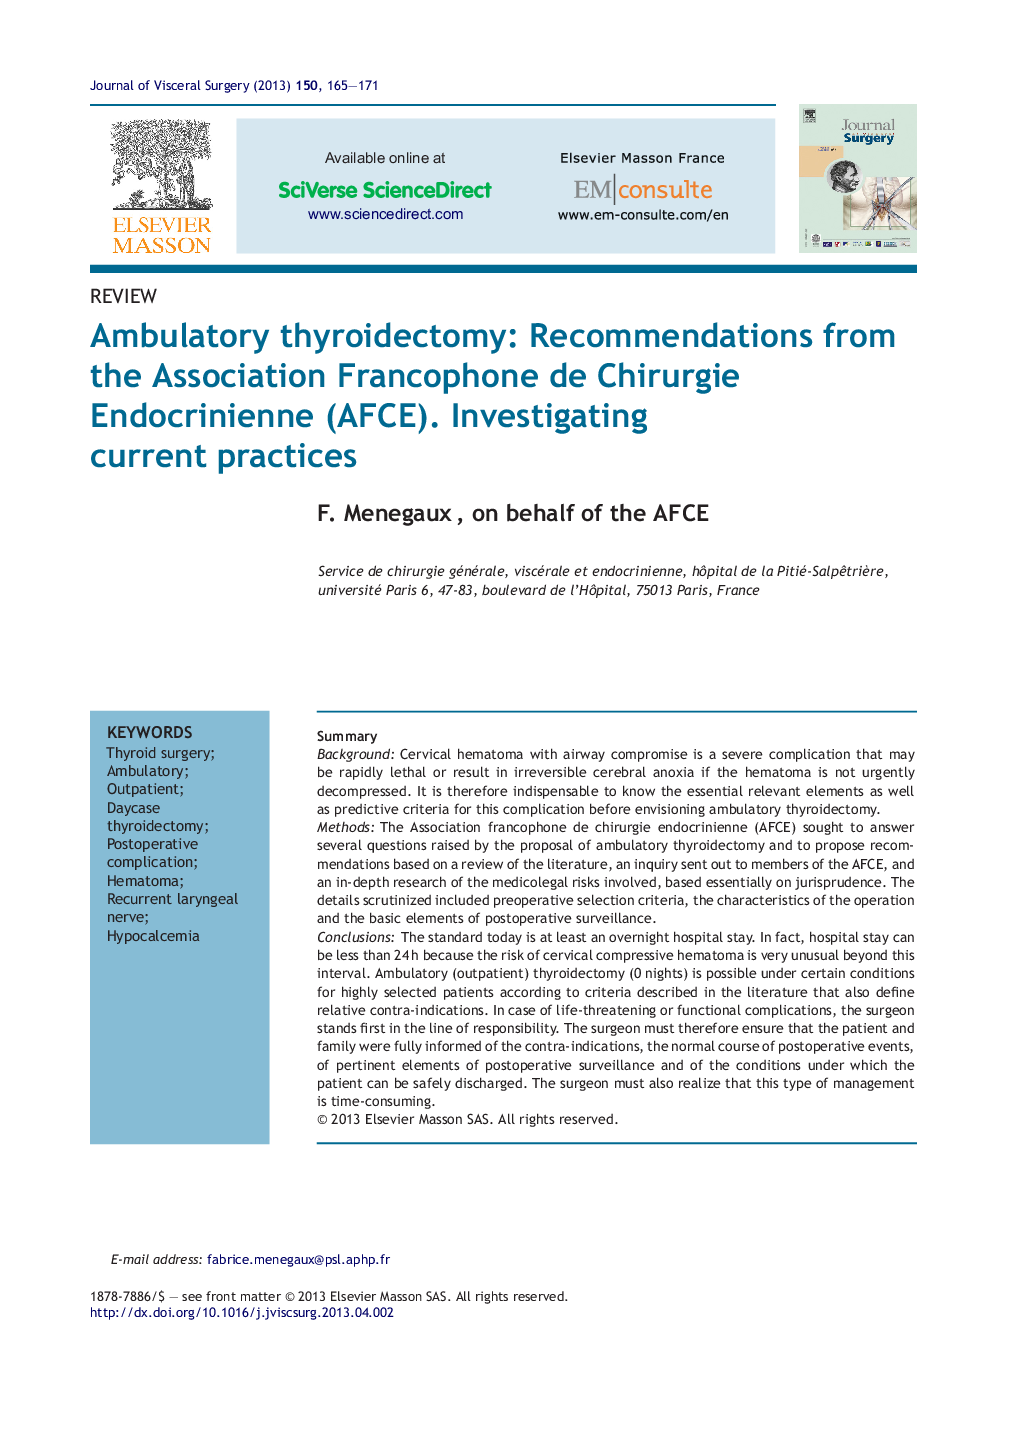 Ambulatory thyroidectomy: Recommendations from the Association Francophone de Chirurgie Endocrinienne (AFCE). Investigating current practices